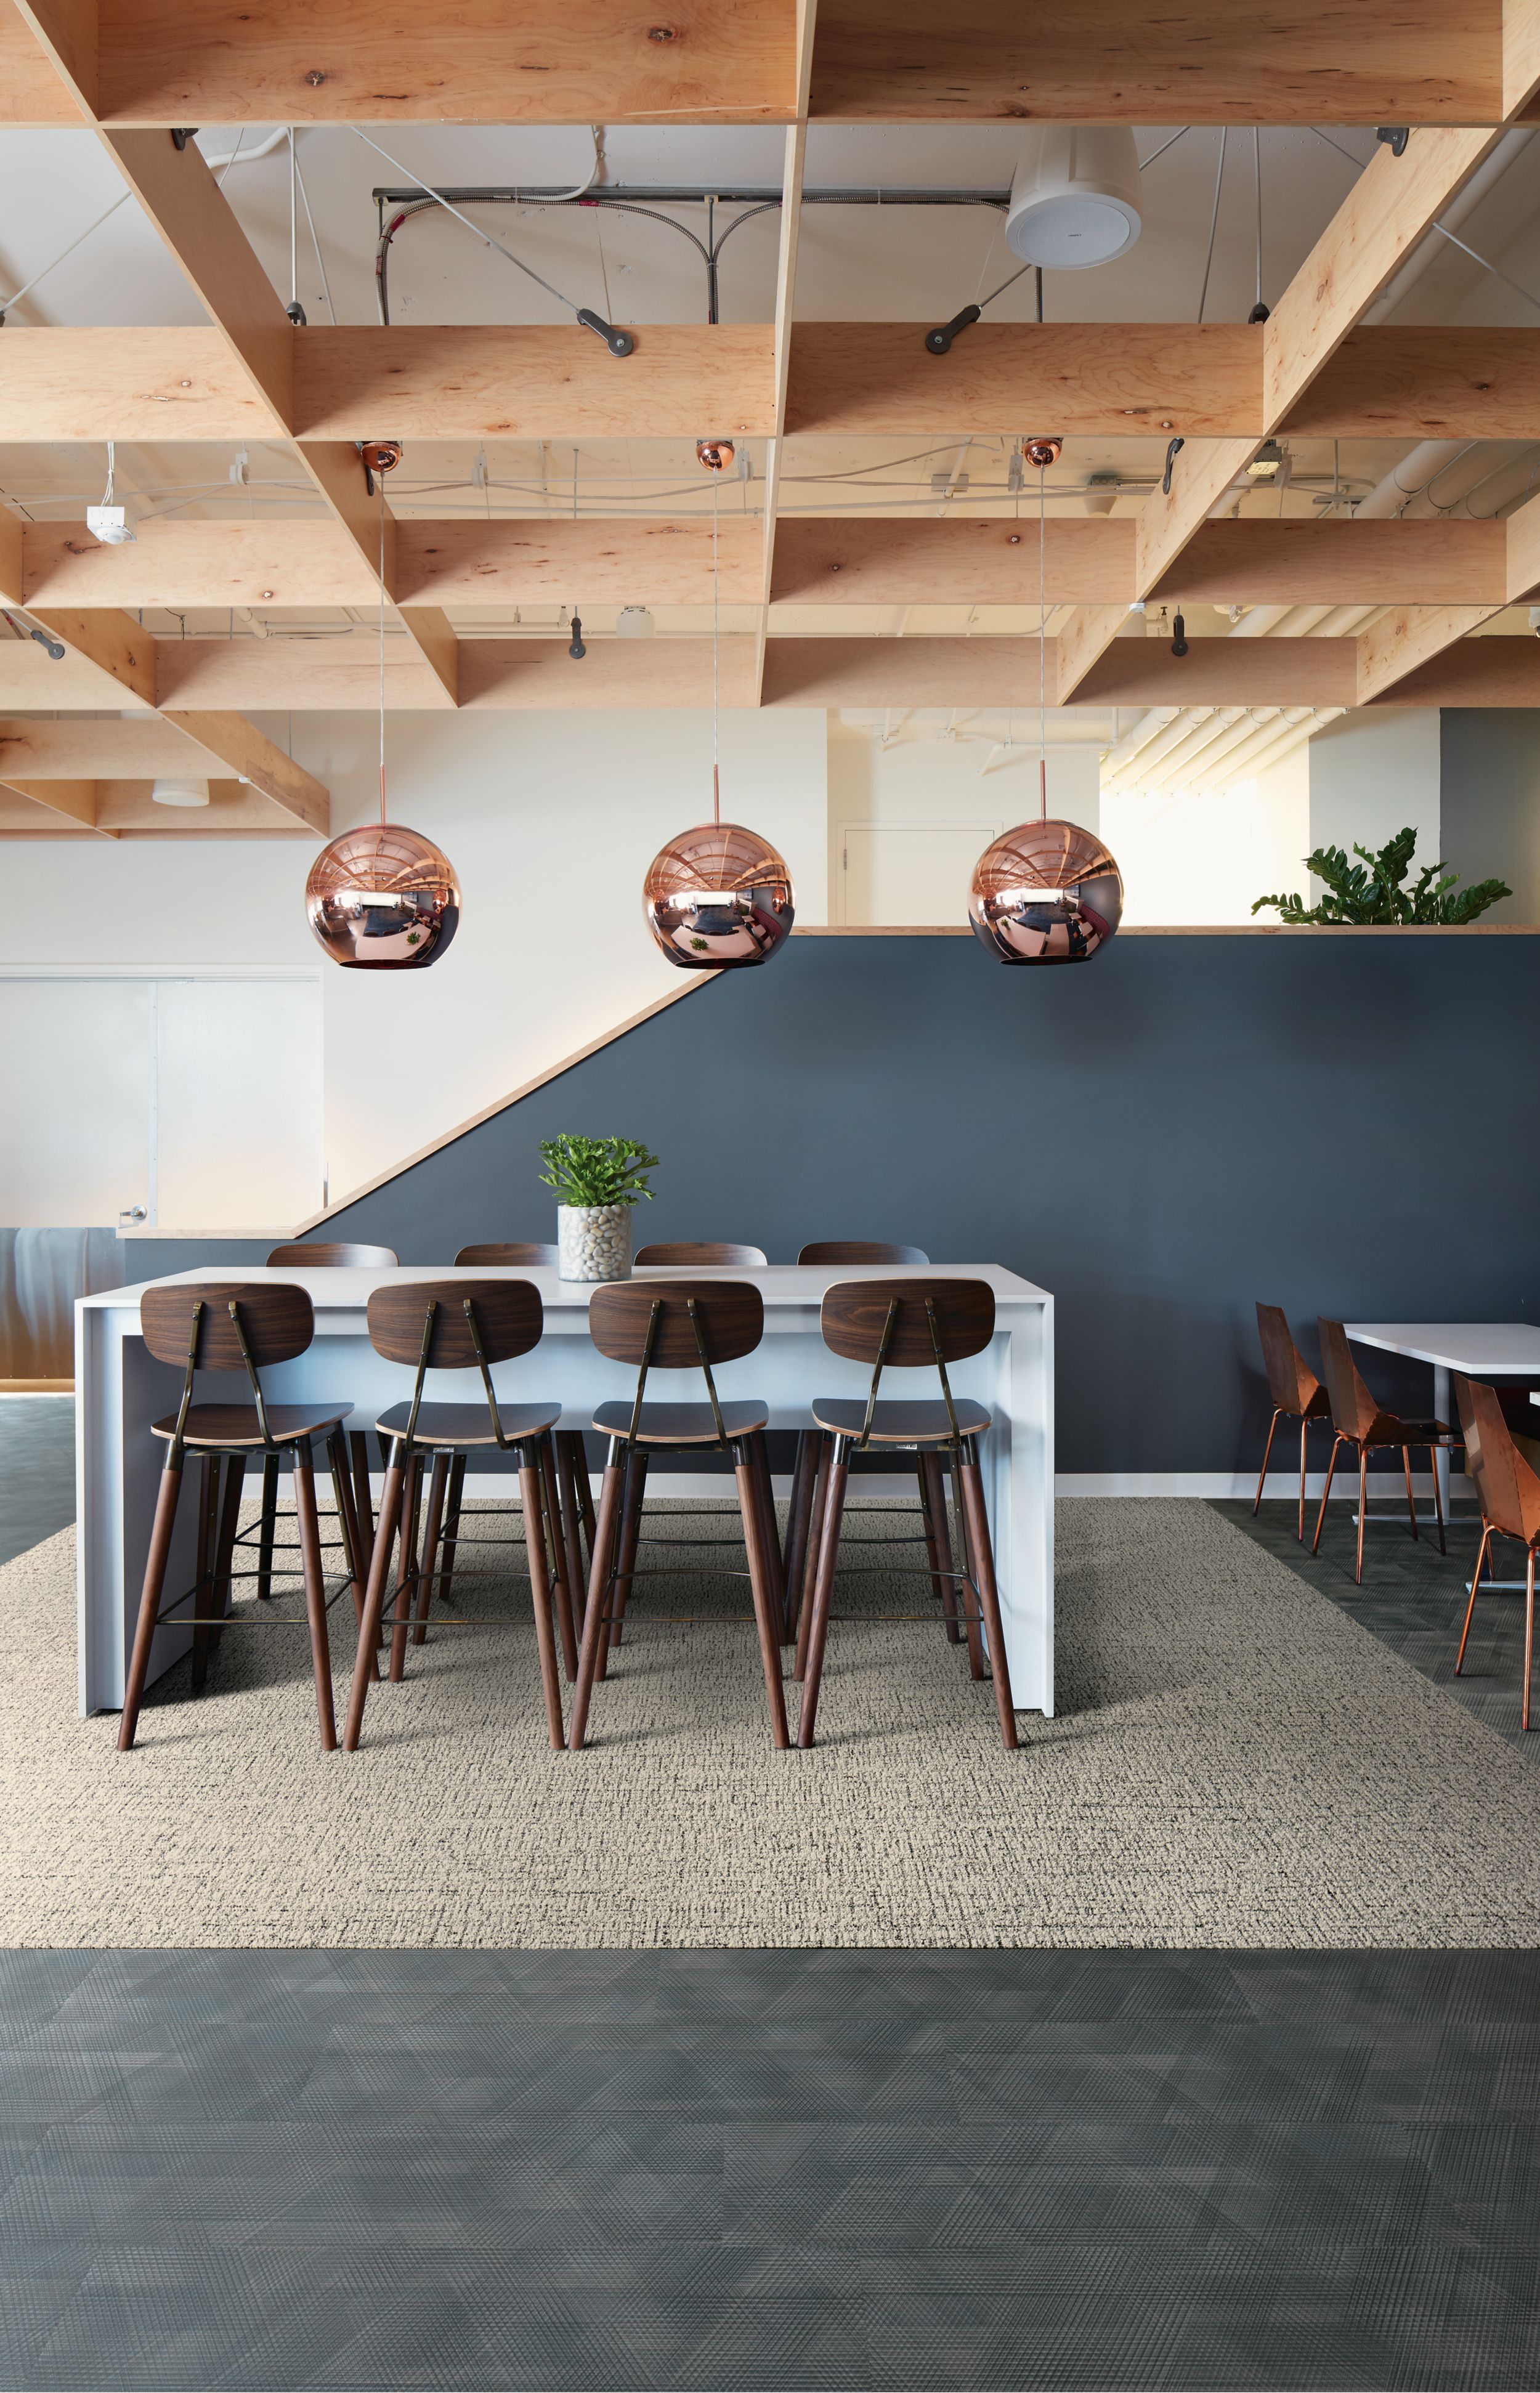 Interface Haptic plank carpet tile and Drawn Lines LVT in public office space with wood grid ceiling afbeeldingnummer 2